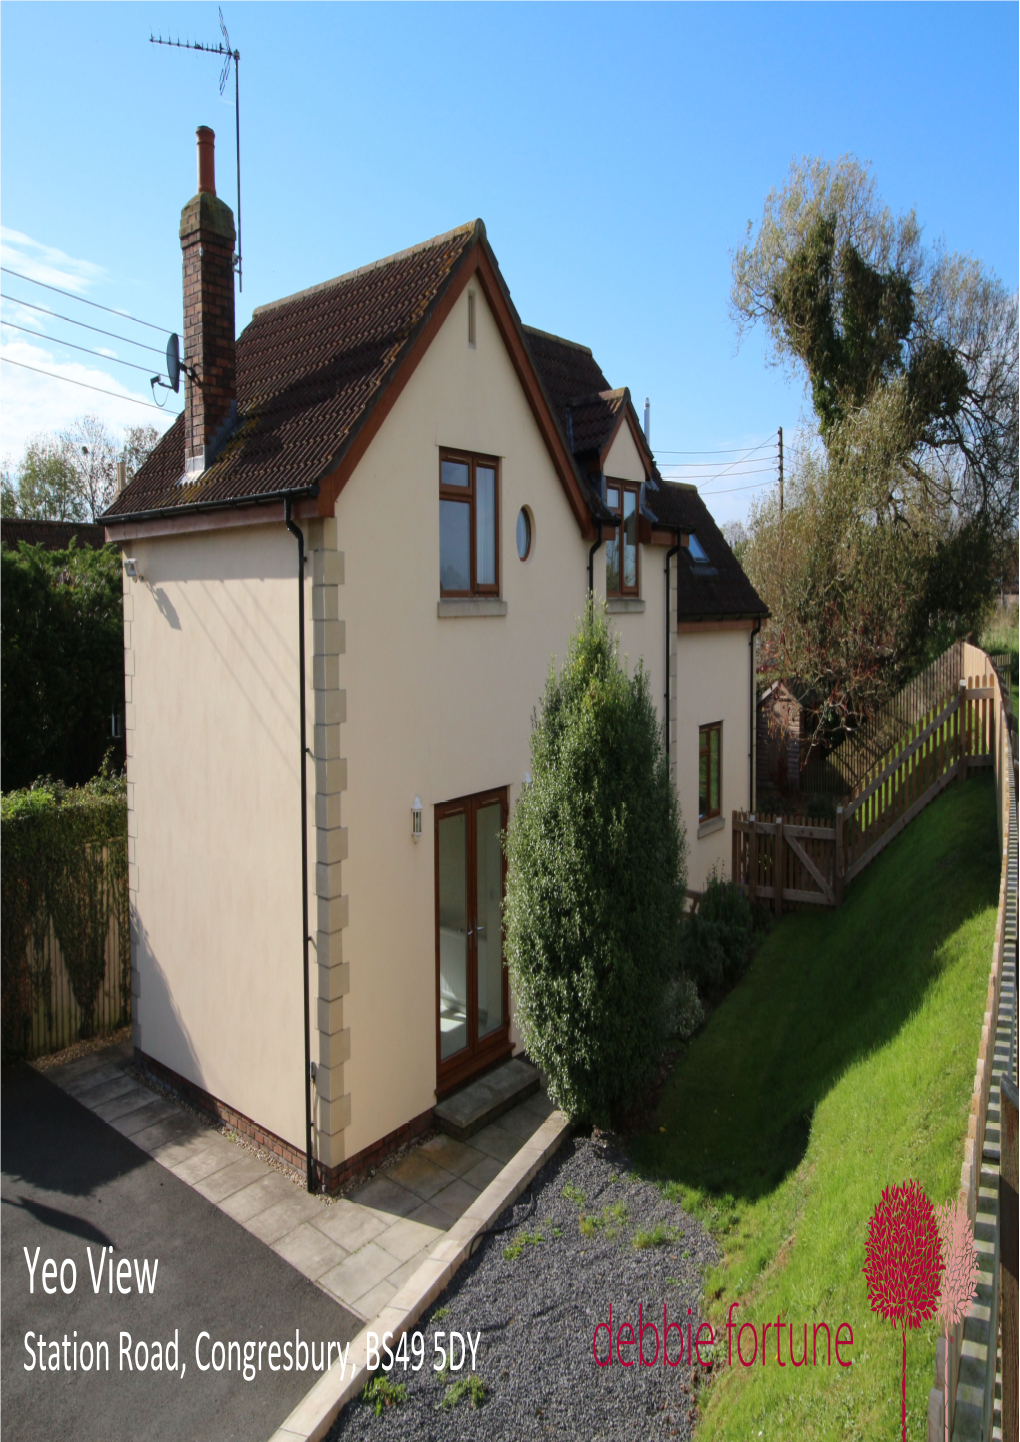 Yeo View Station Road, Congresbury, BS49 5DY